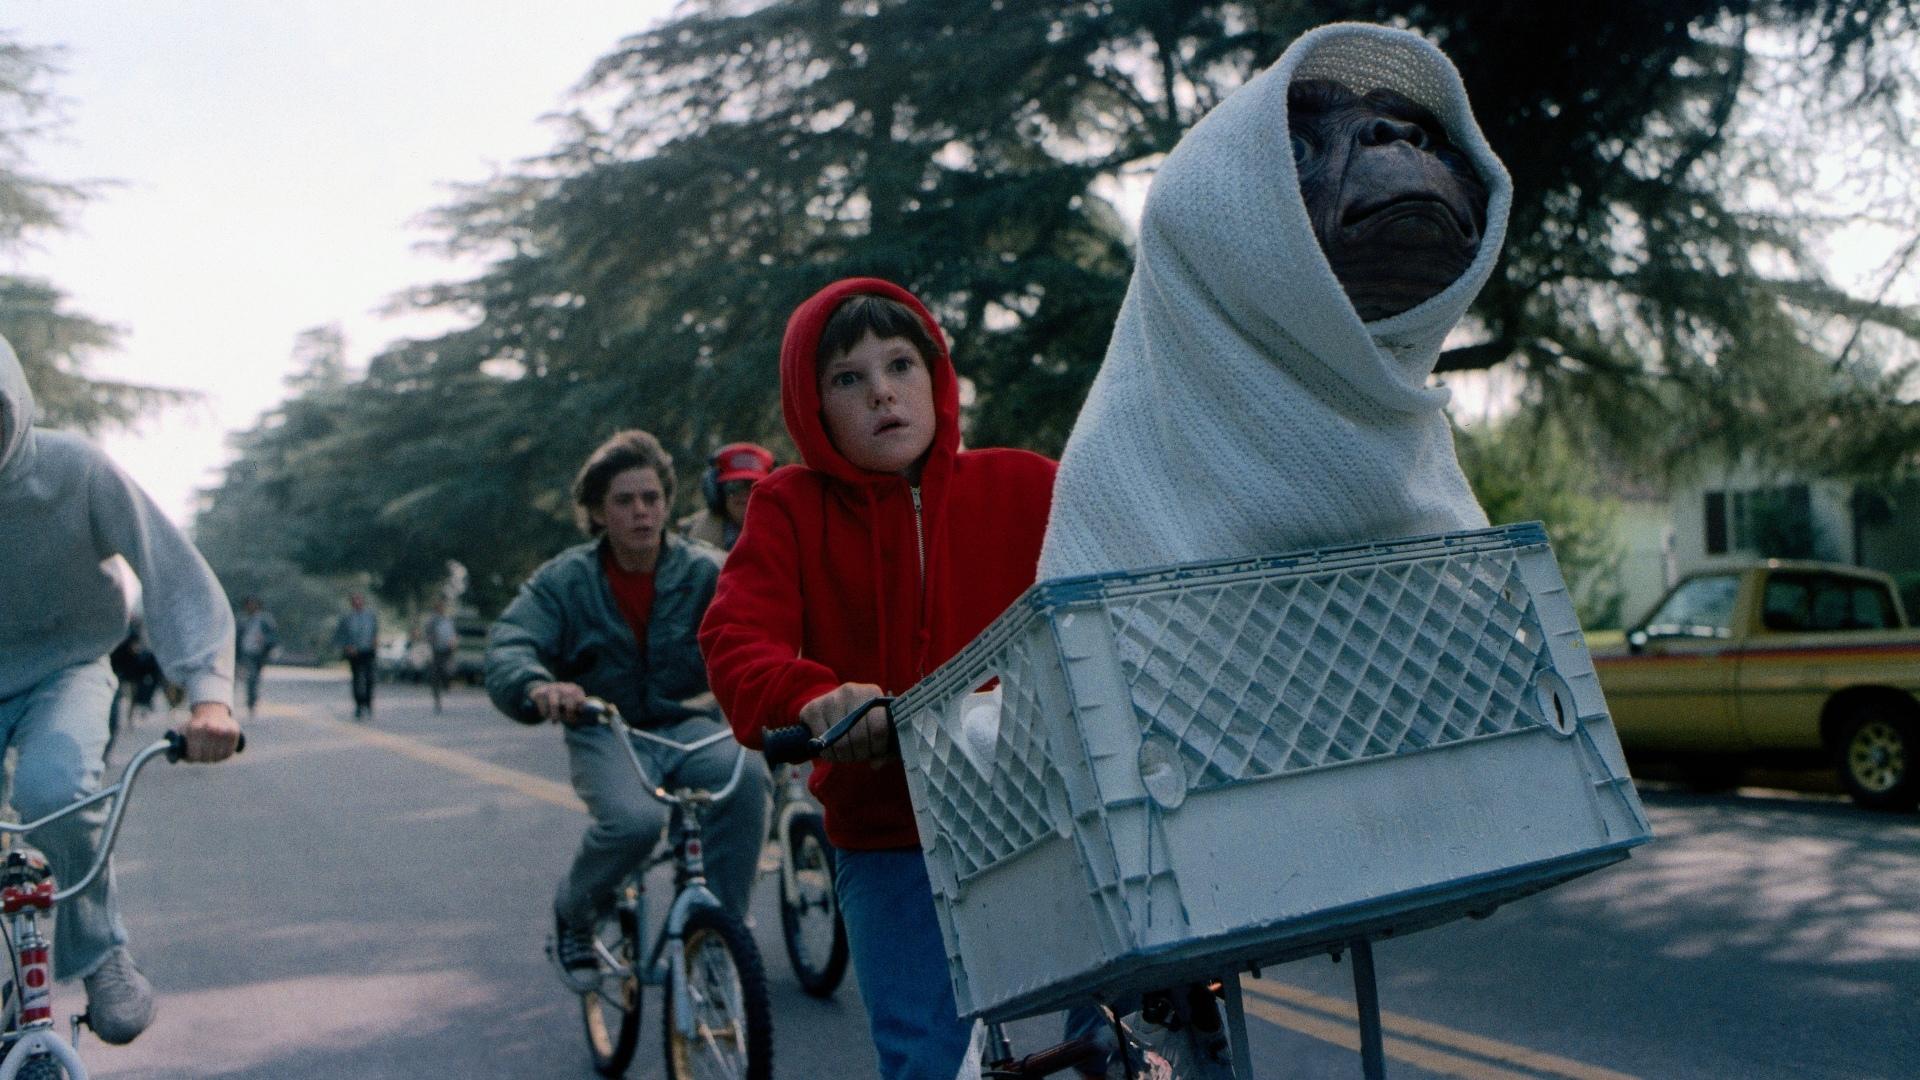 E.T. the Extra-Terrestrial download the new version for ios